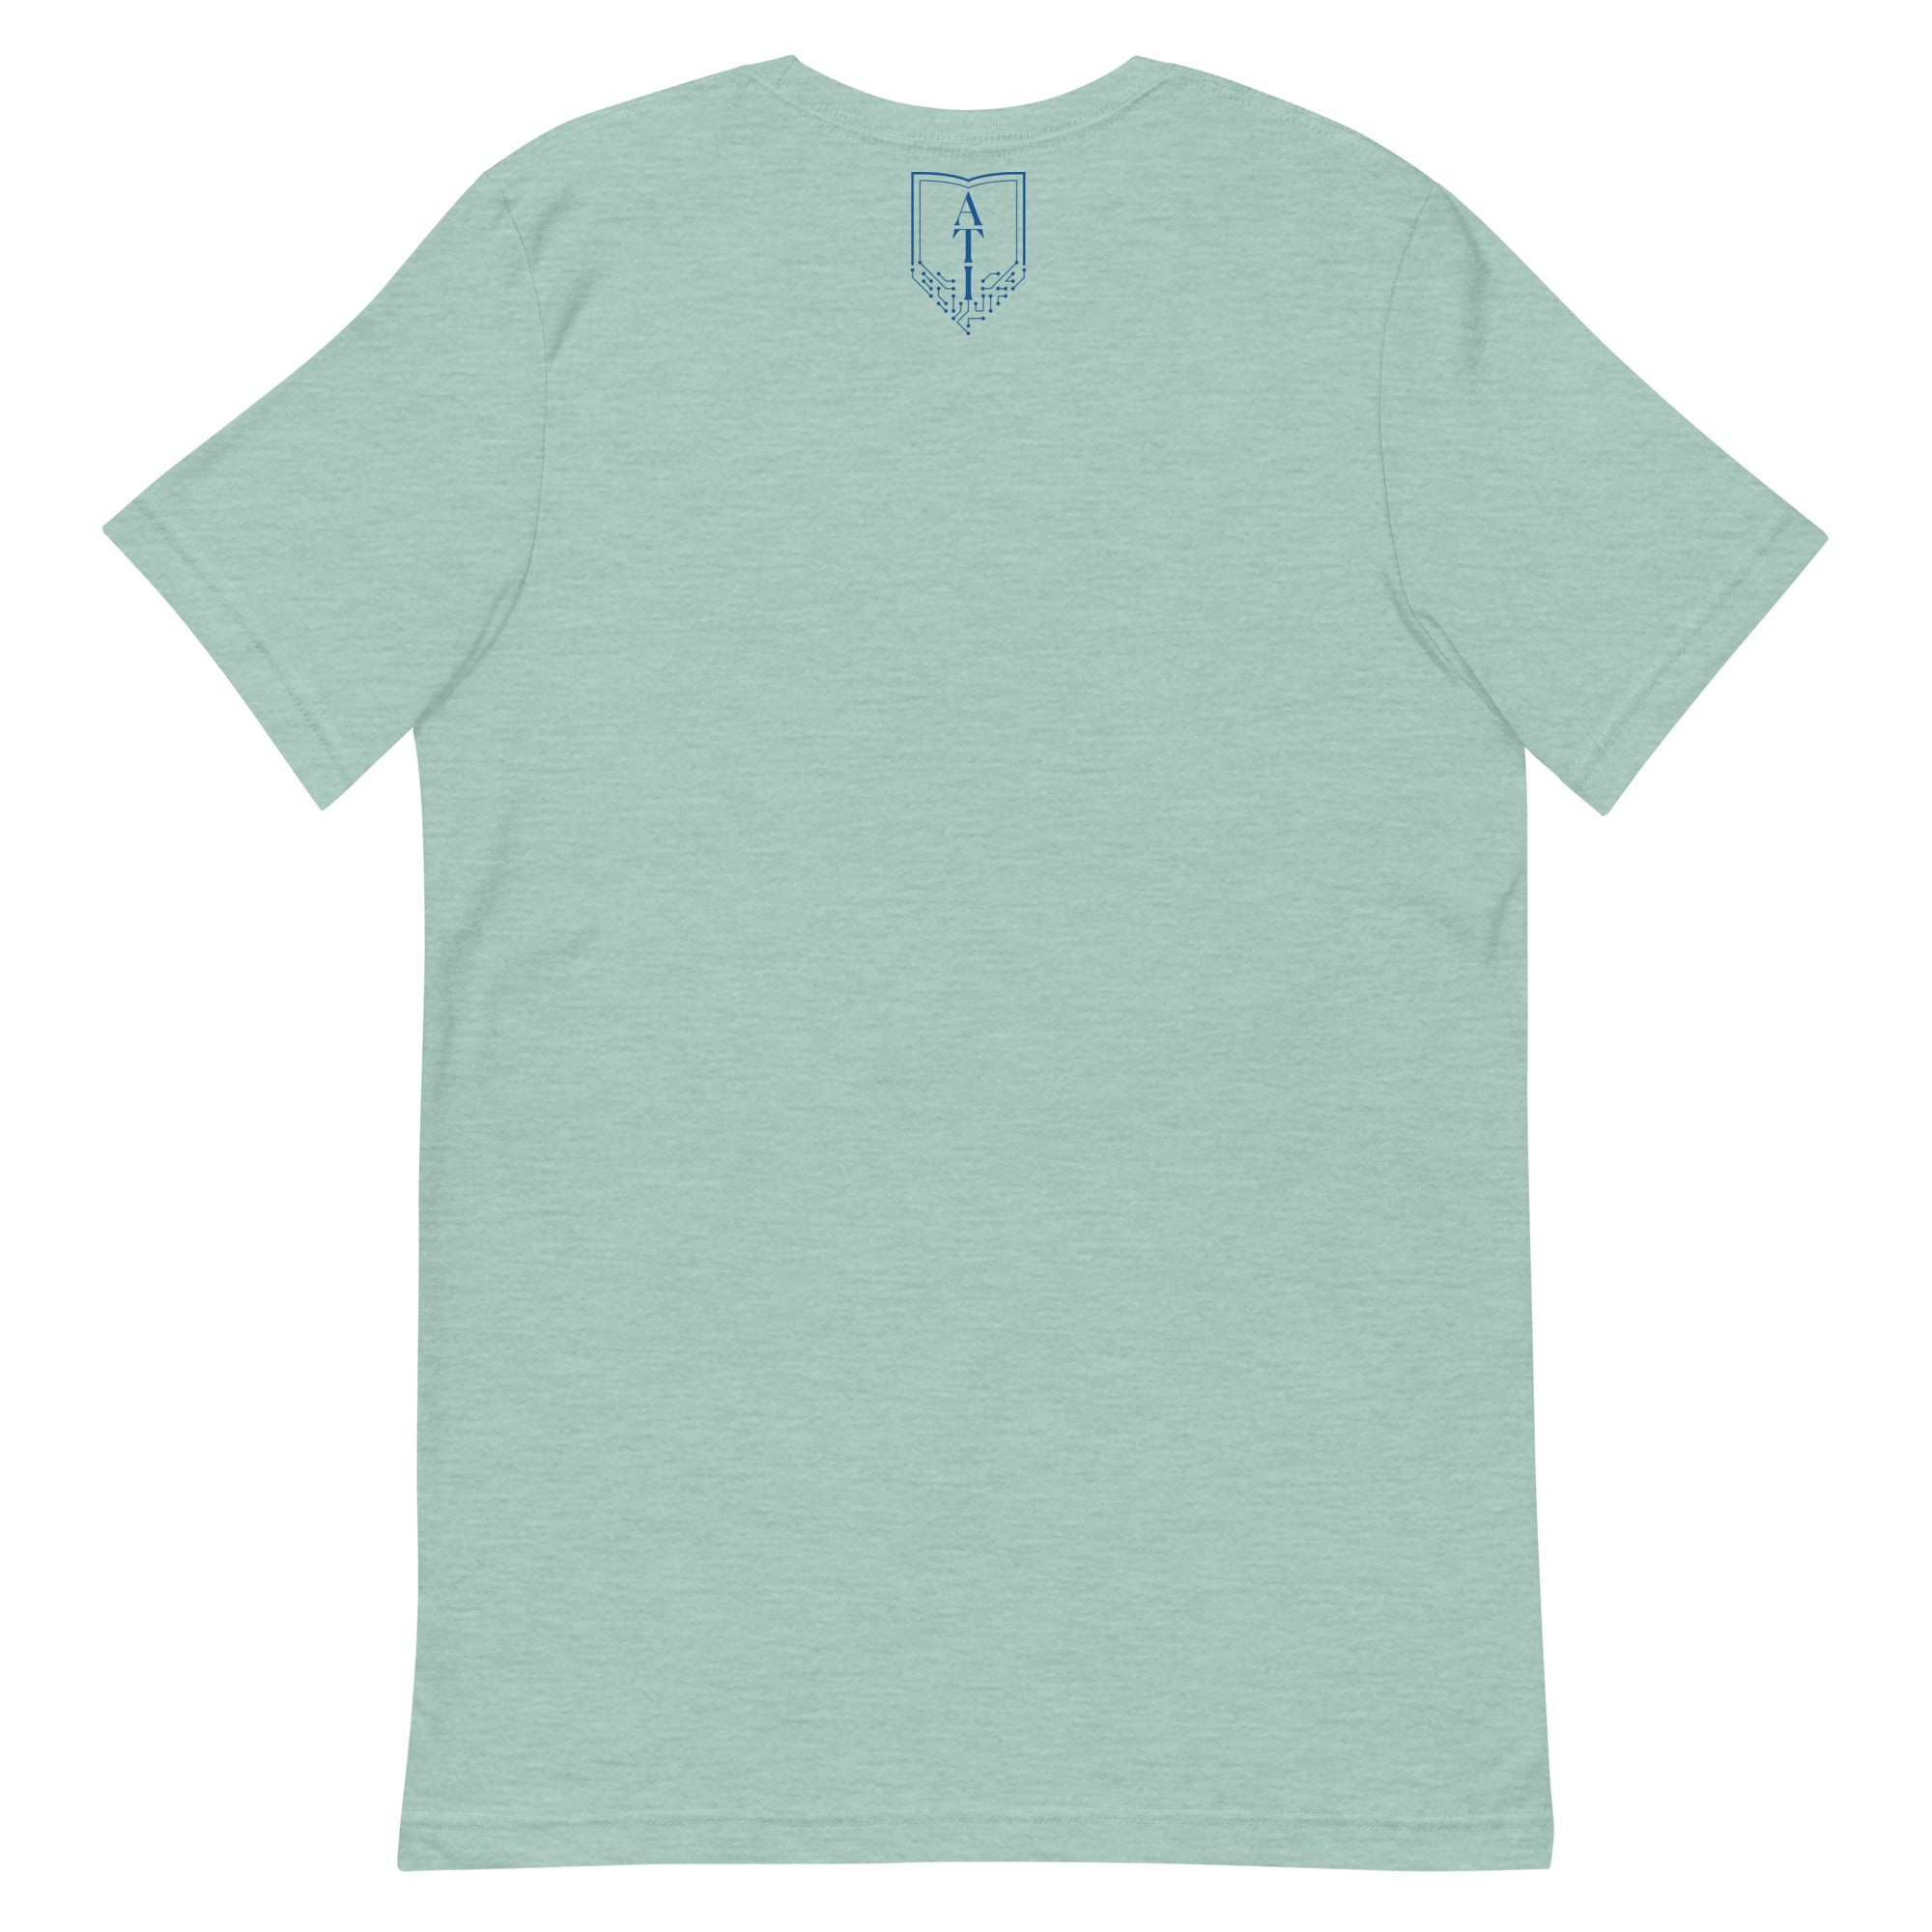 Basic Softness Hi-Lo Shirt in Dusty Blue - Retro, Indie and Unique